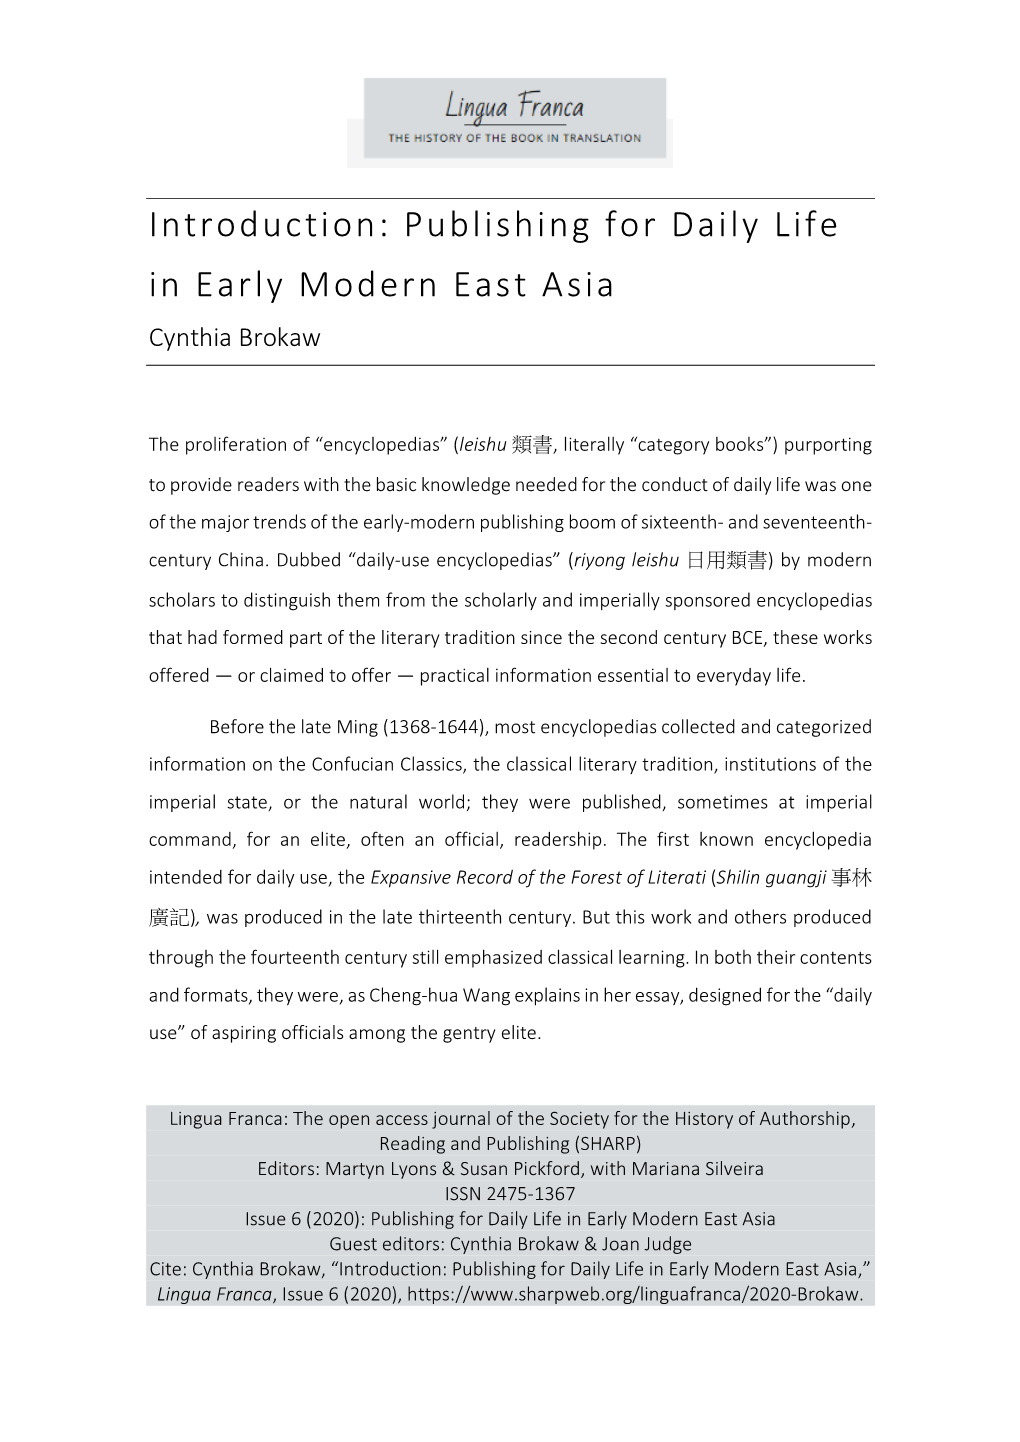 Introduction: Publishing for Daily Life in Early Modern East Asia Cynthia Brokaw